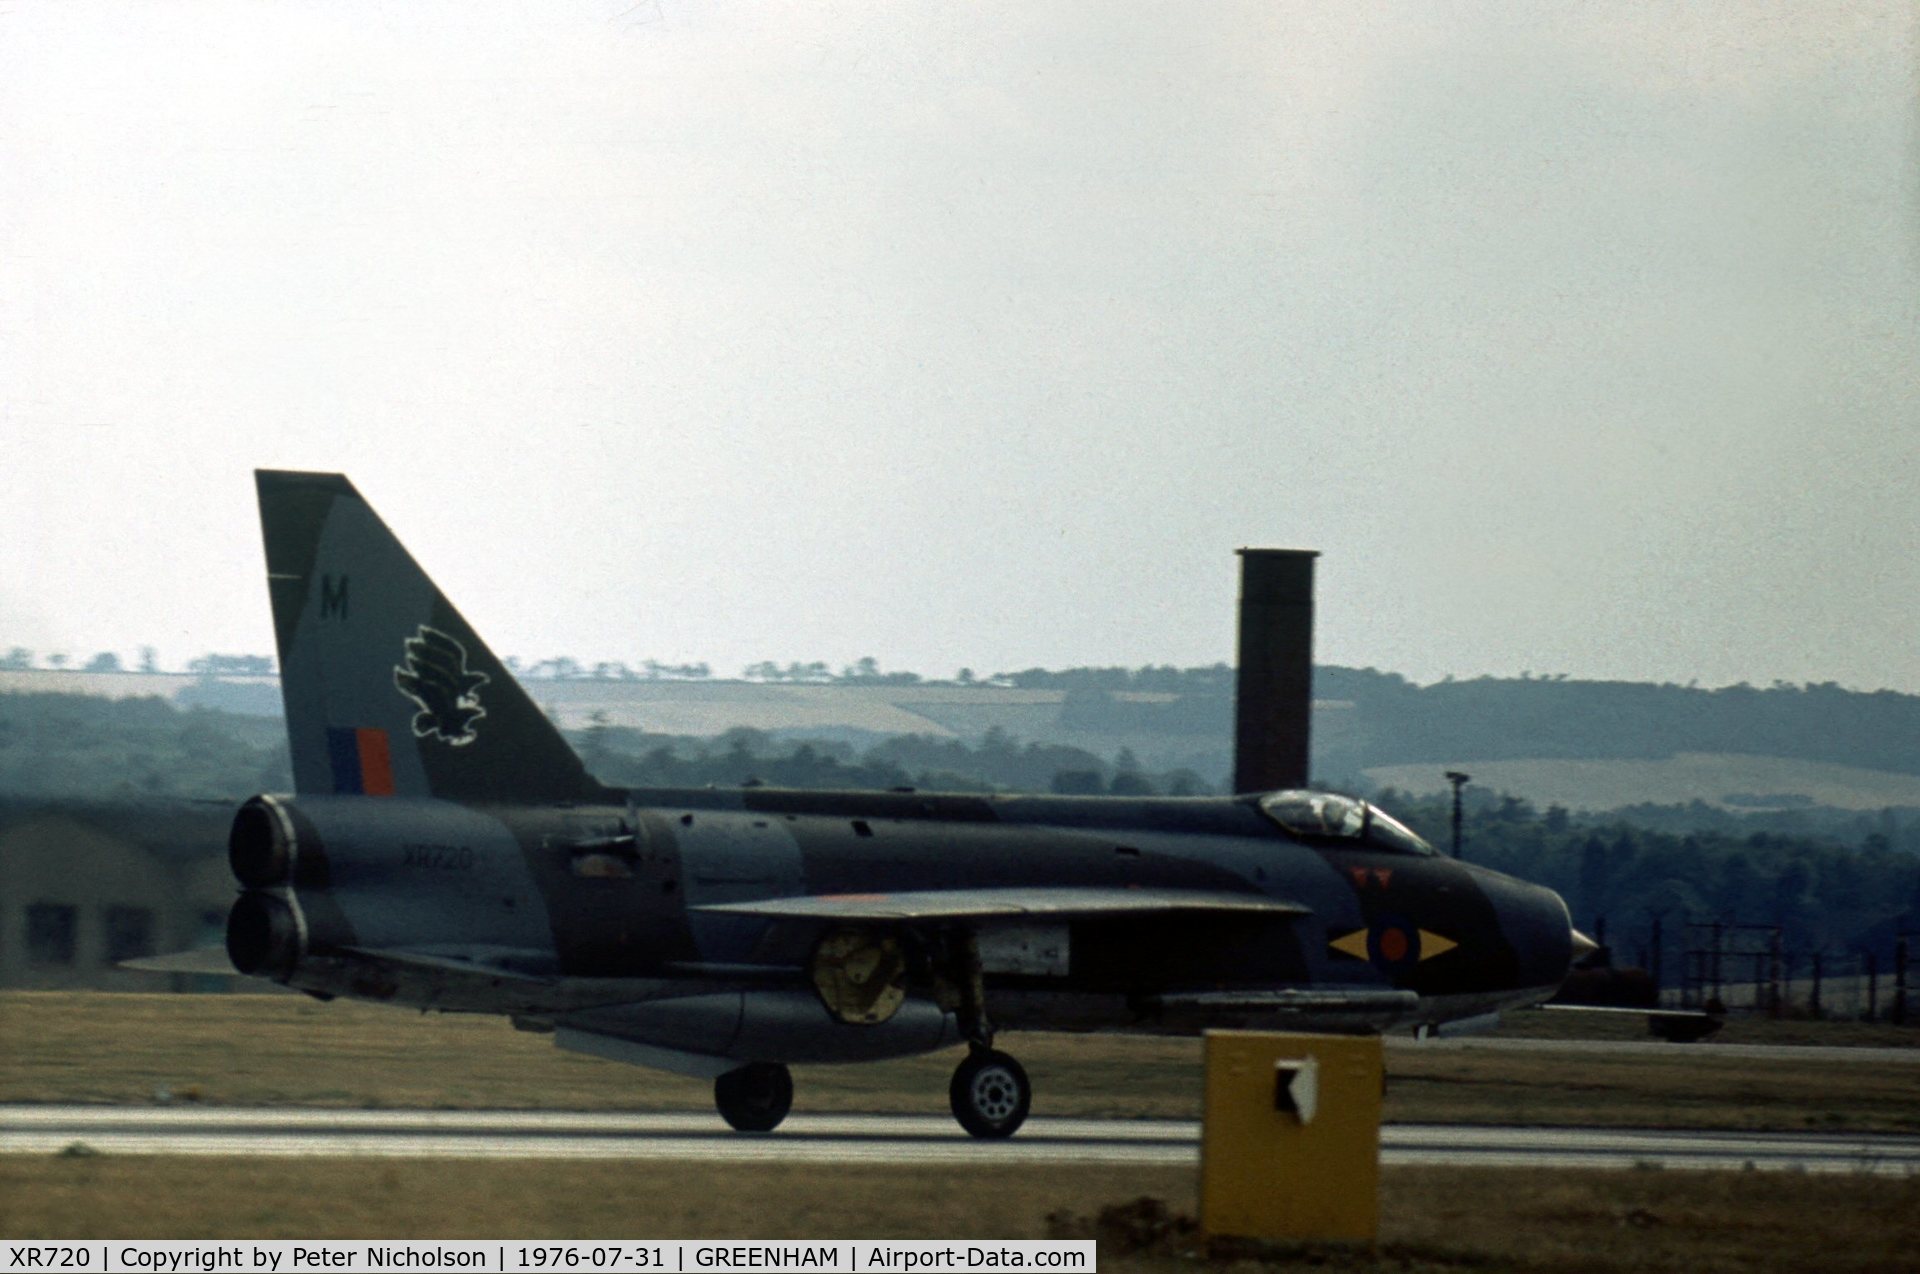 XR720, 1964 English Electric Lightning F.3 C/N 95203, Lightning F.3 of 11 Squadron at the end of his landing roll at the 1976 Intnl Air Tattoo at RAF Greenham Common.